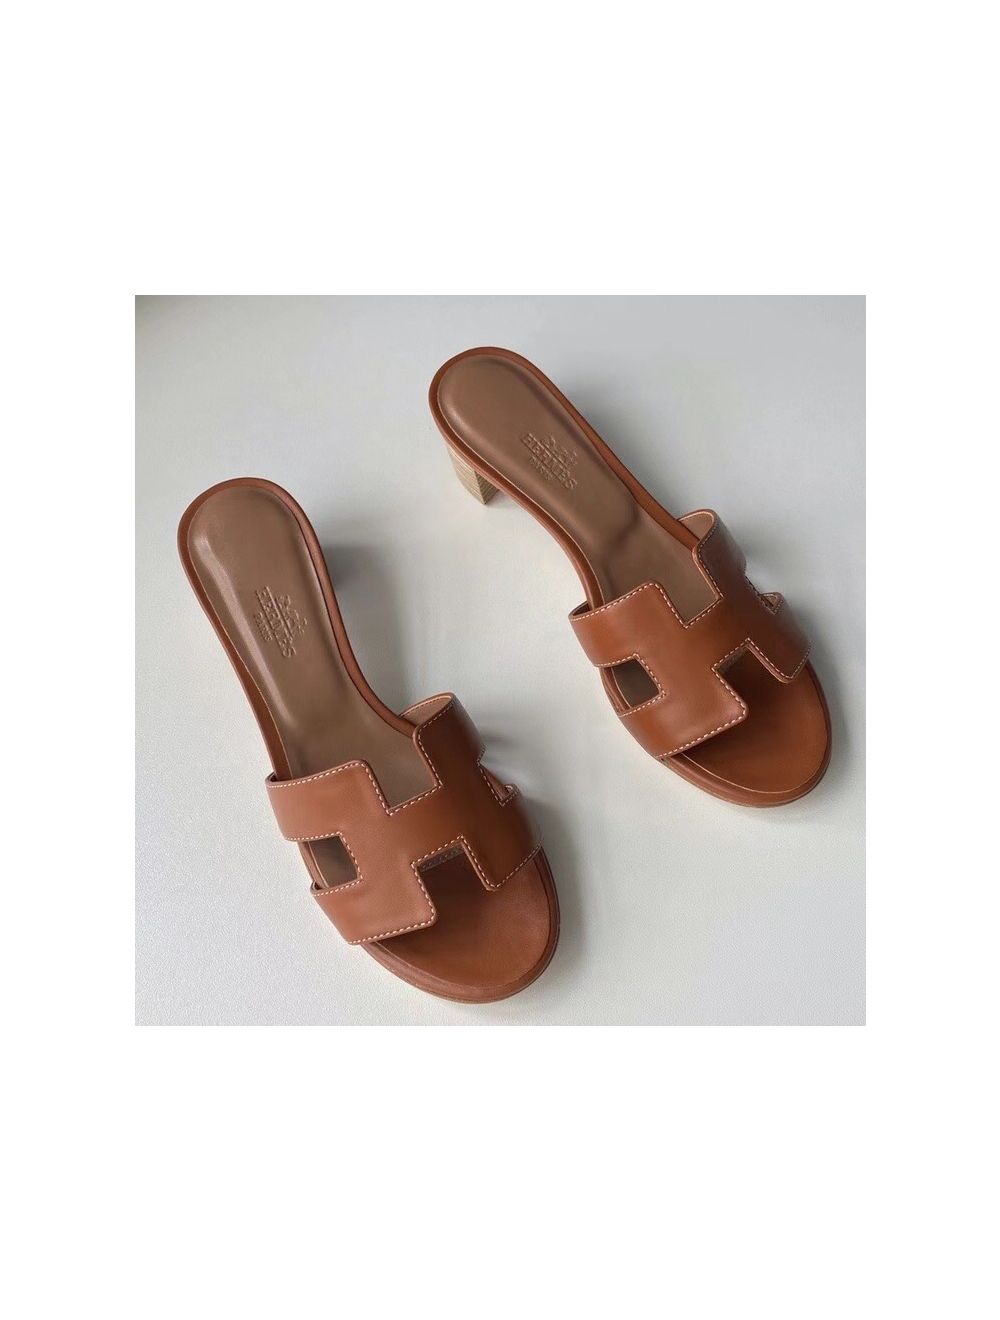 Replica Hermes Oasis Sandals In Gold Swift Leather